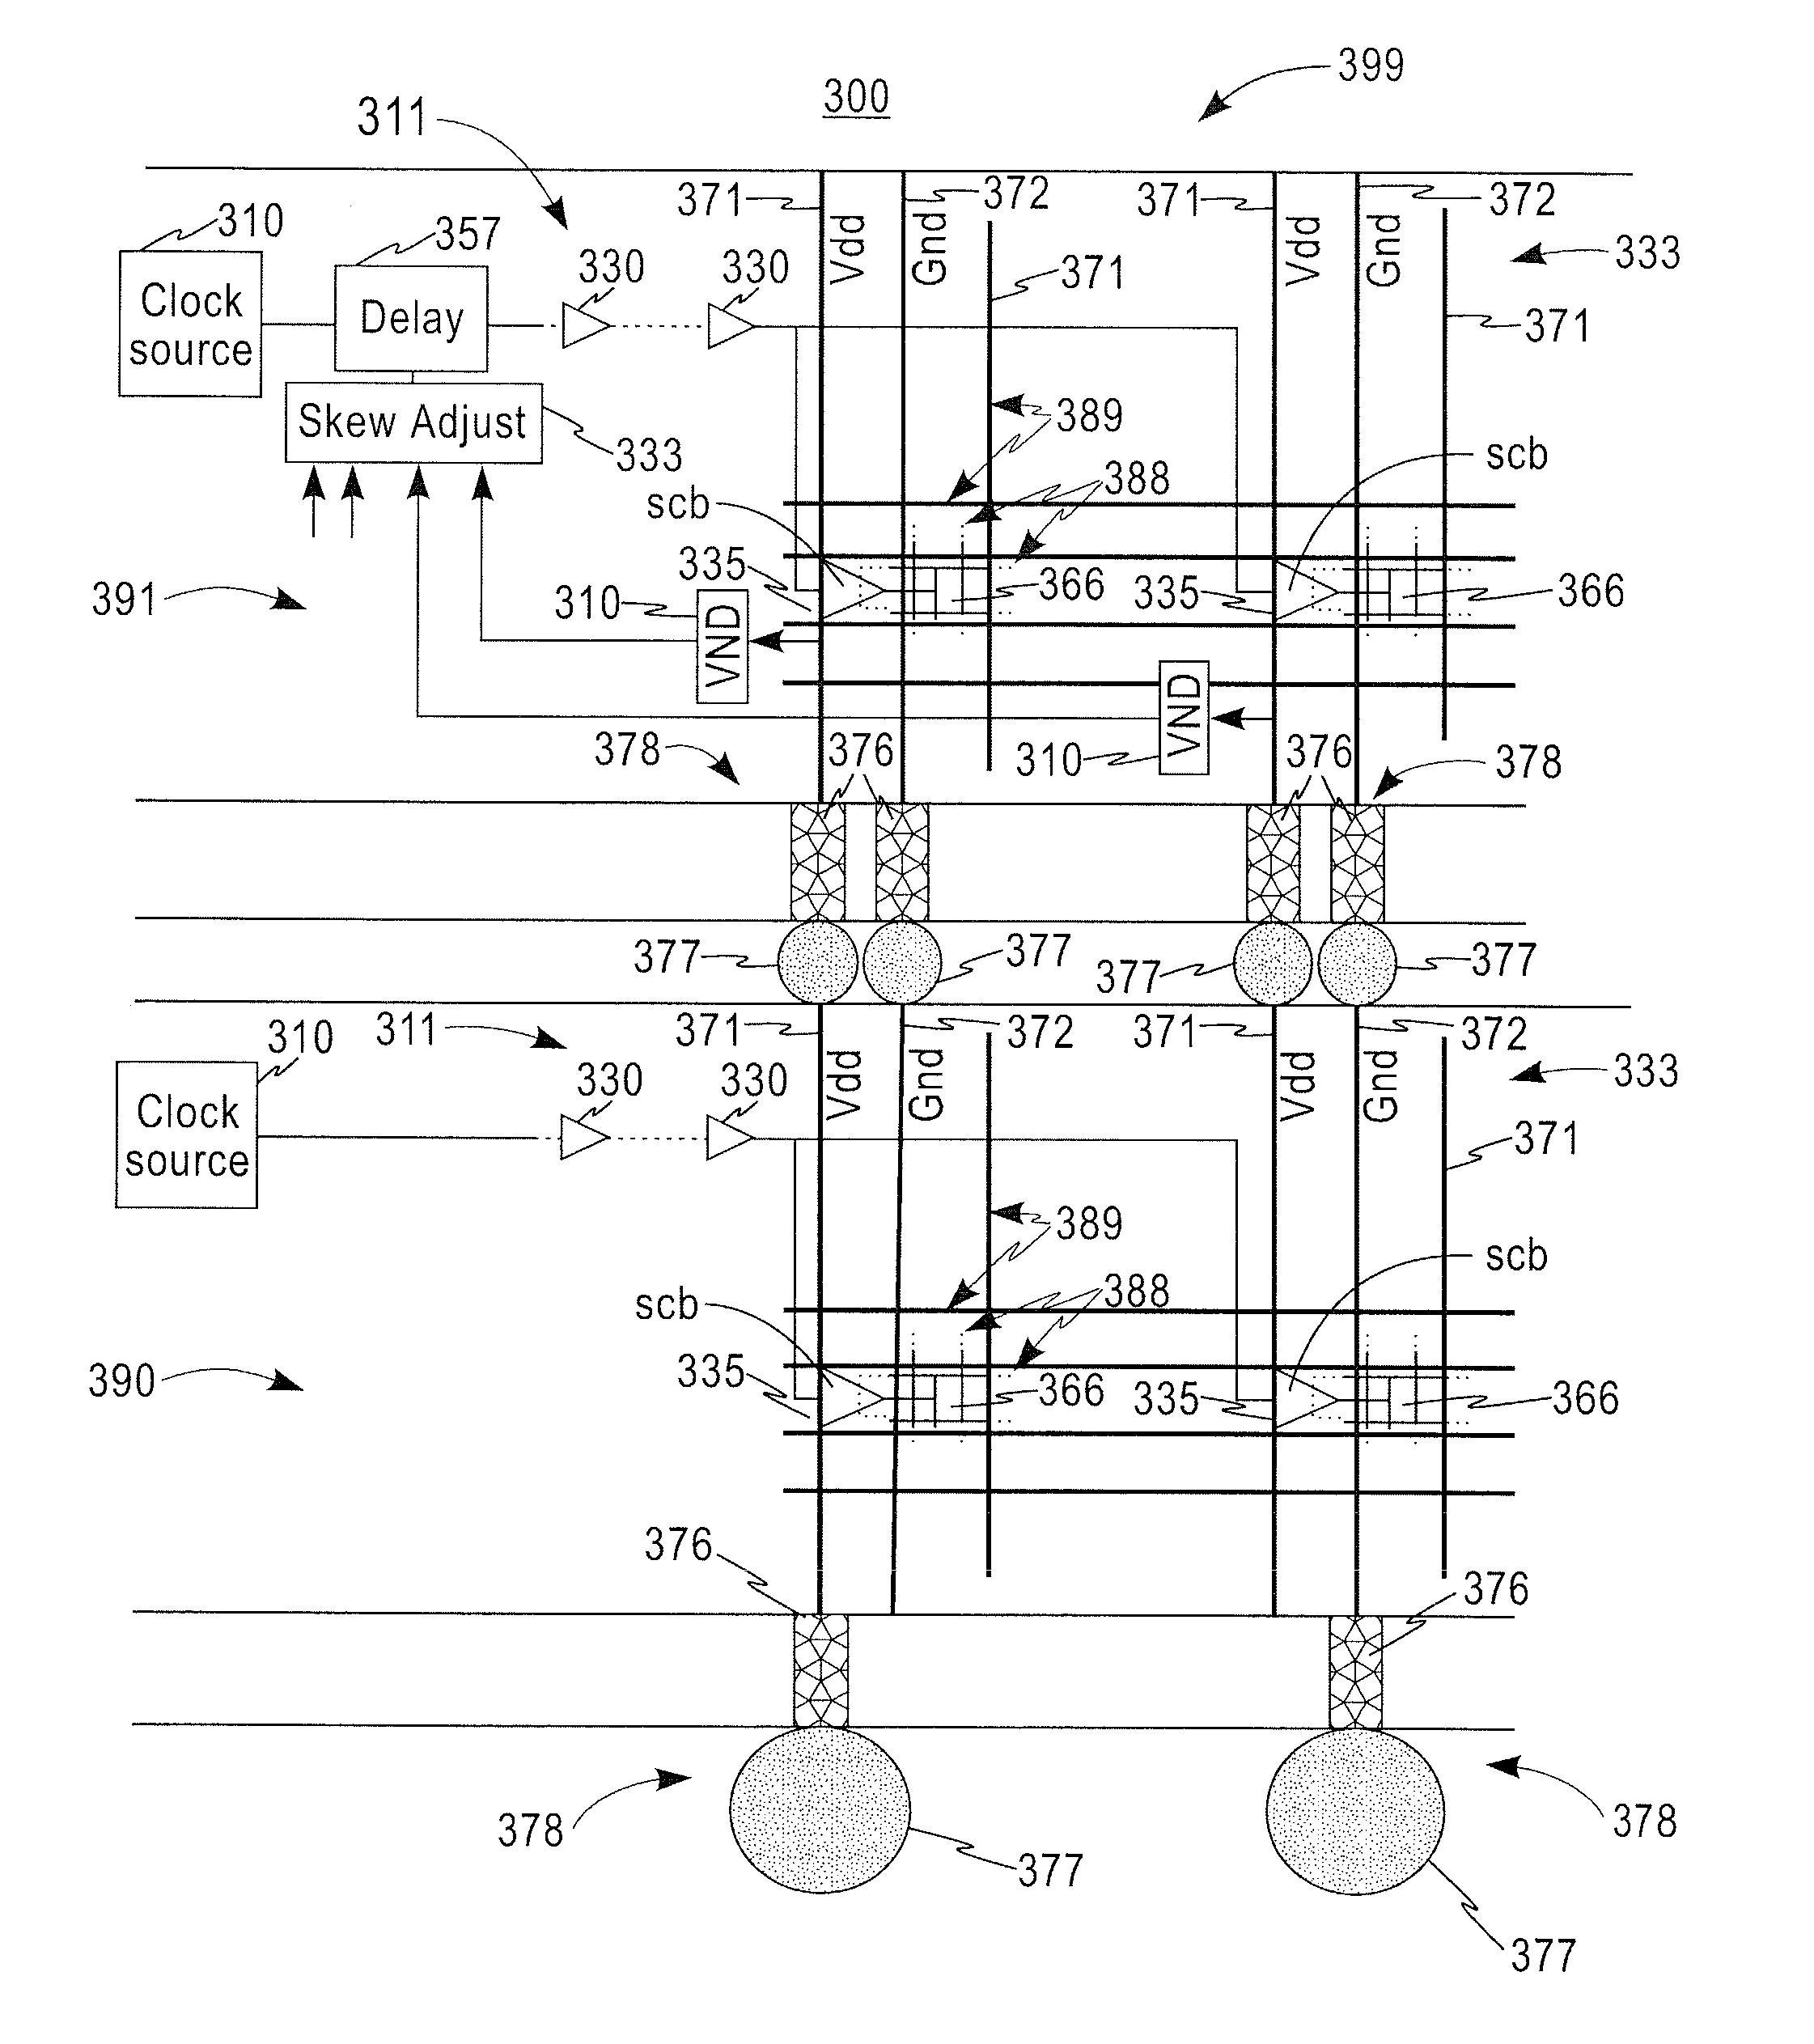 Ac supply noise reduction in a 3D stack with voltage sensing and clock shifting